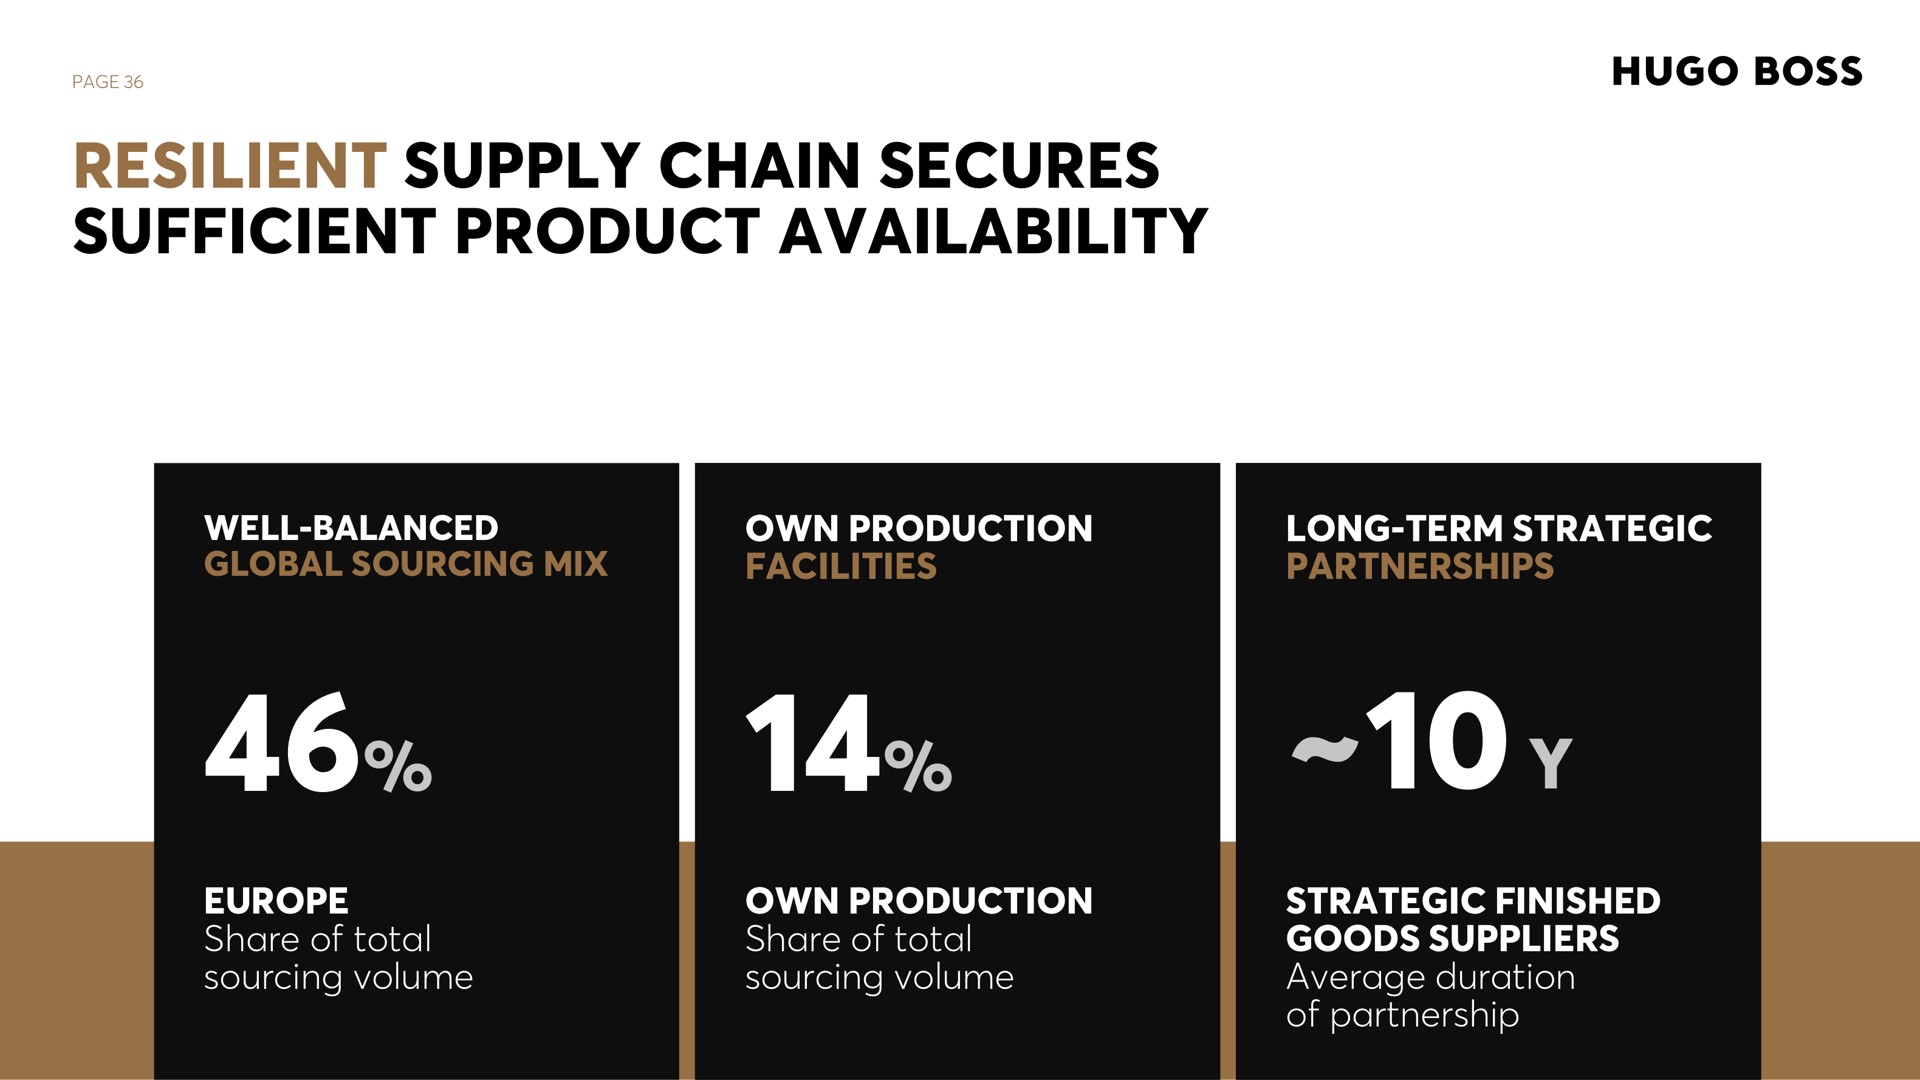 page resilient supply chain secures sufficient product availability well balanced global sourcing mix own production facilities long term strategic partnerships share of total sourcing volume own production share of total sourcing volume strategic finished goods suppliers average duration of partnership boss a | Hugo Boss